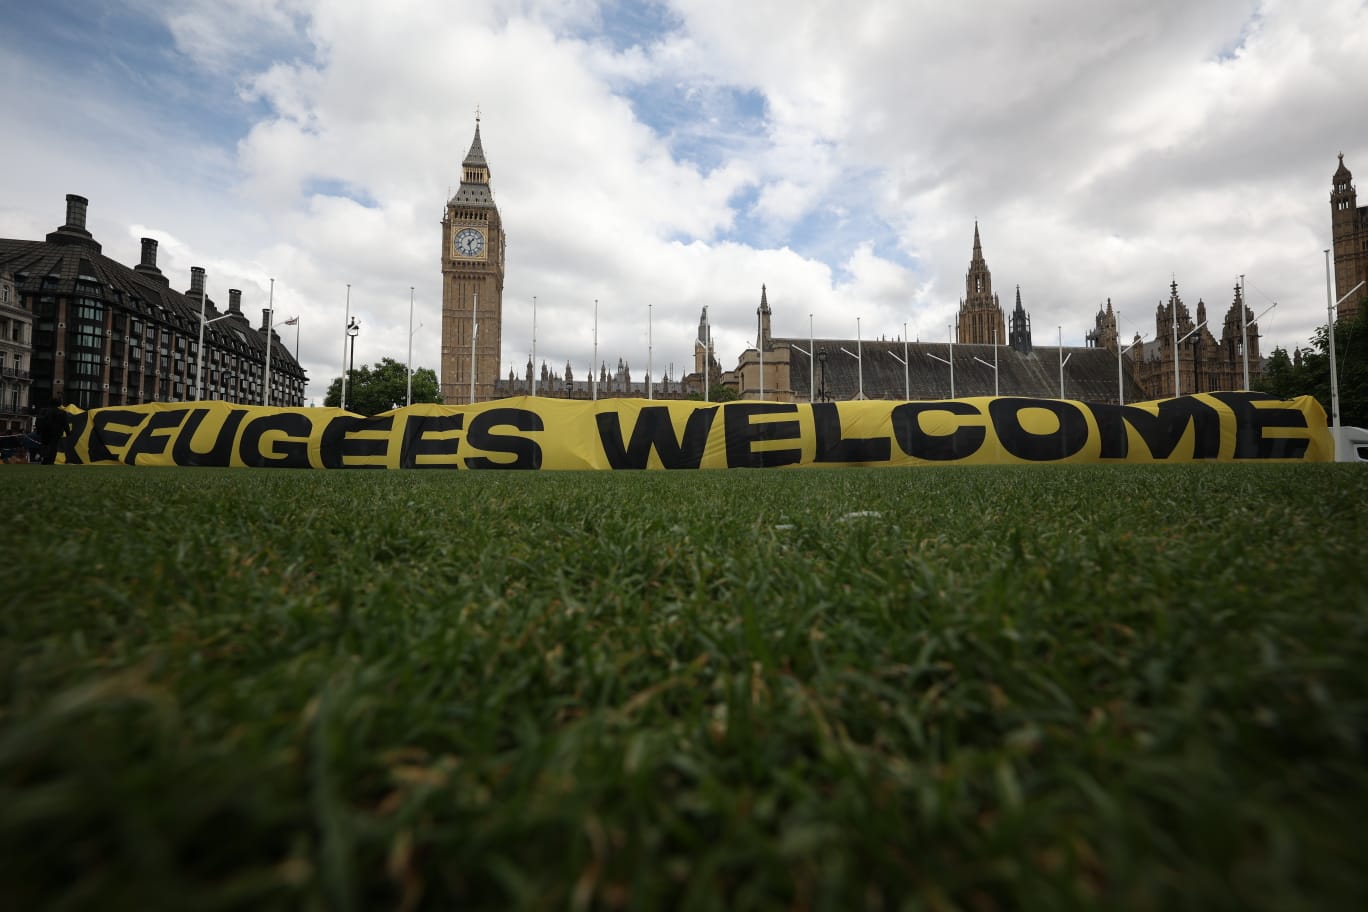 Refugees welcome sign in front of big ben in london.